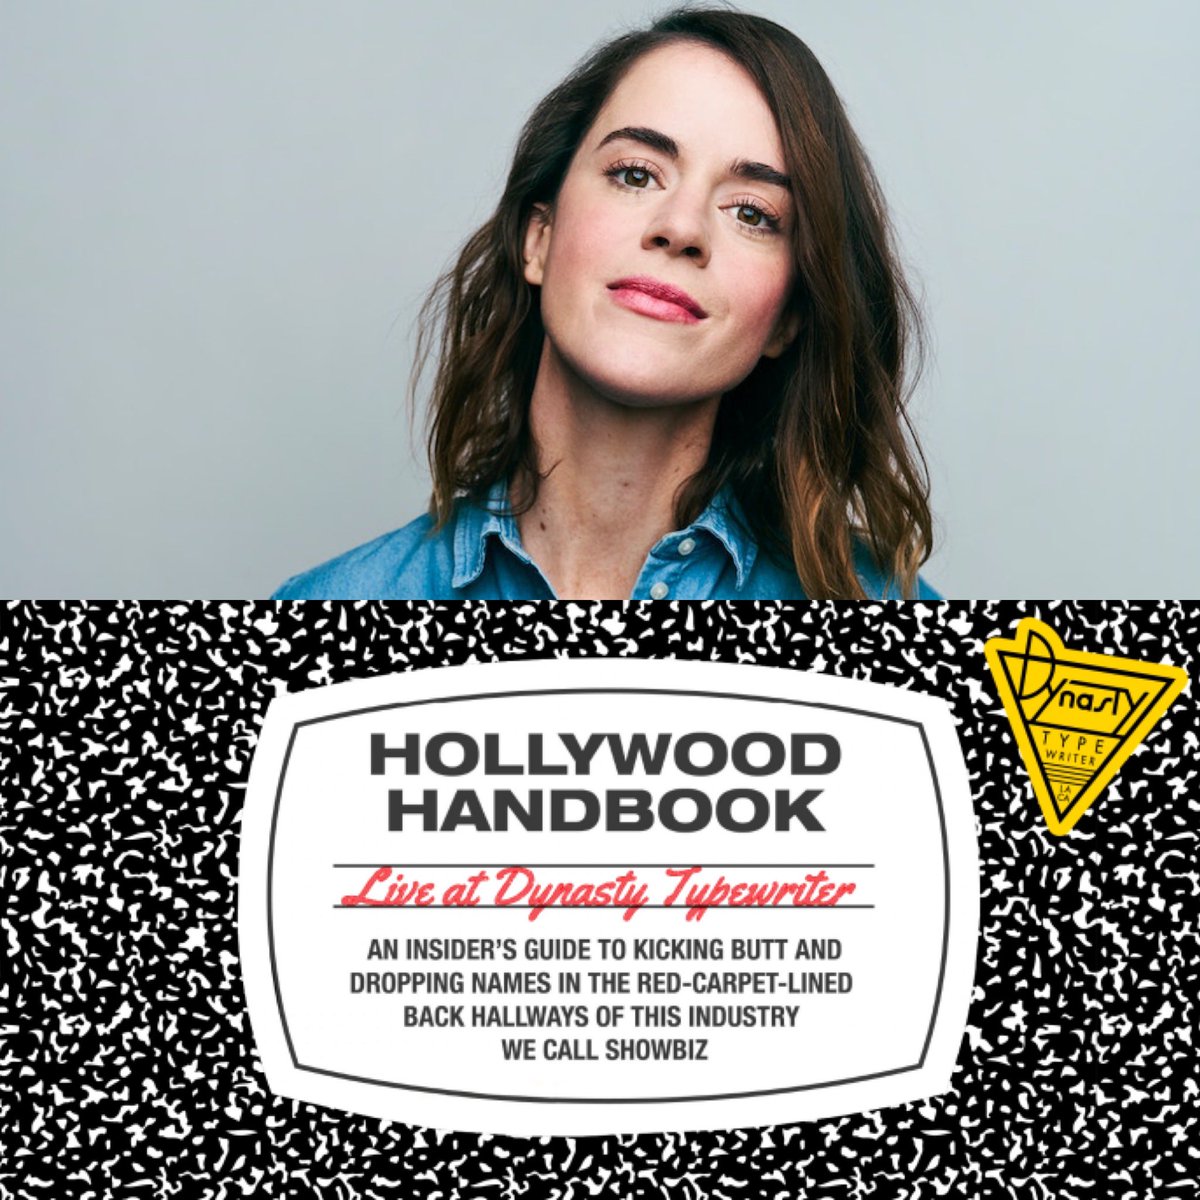 Don’t miss the next Hollywood Handbook live show at Dynasty Typewriter on May 30th with guest Mary Holland! In-person and streaming tickets are available now. bit.ly/41OXEHH @SeanClements @hayesdavenport